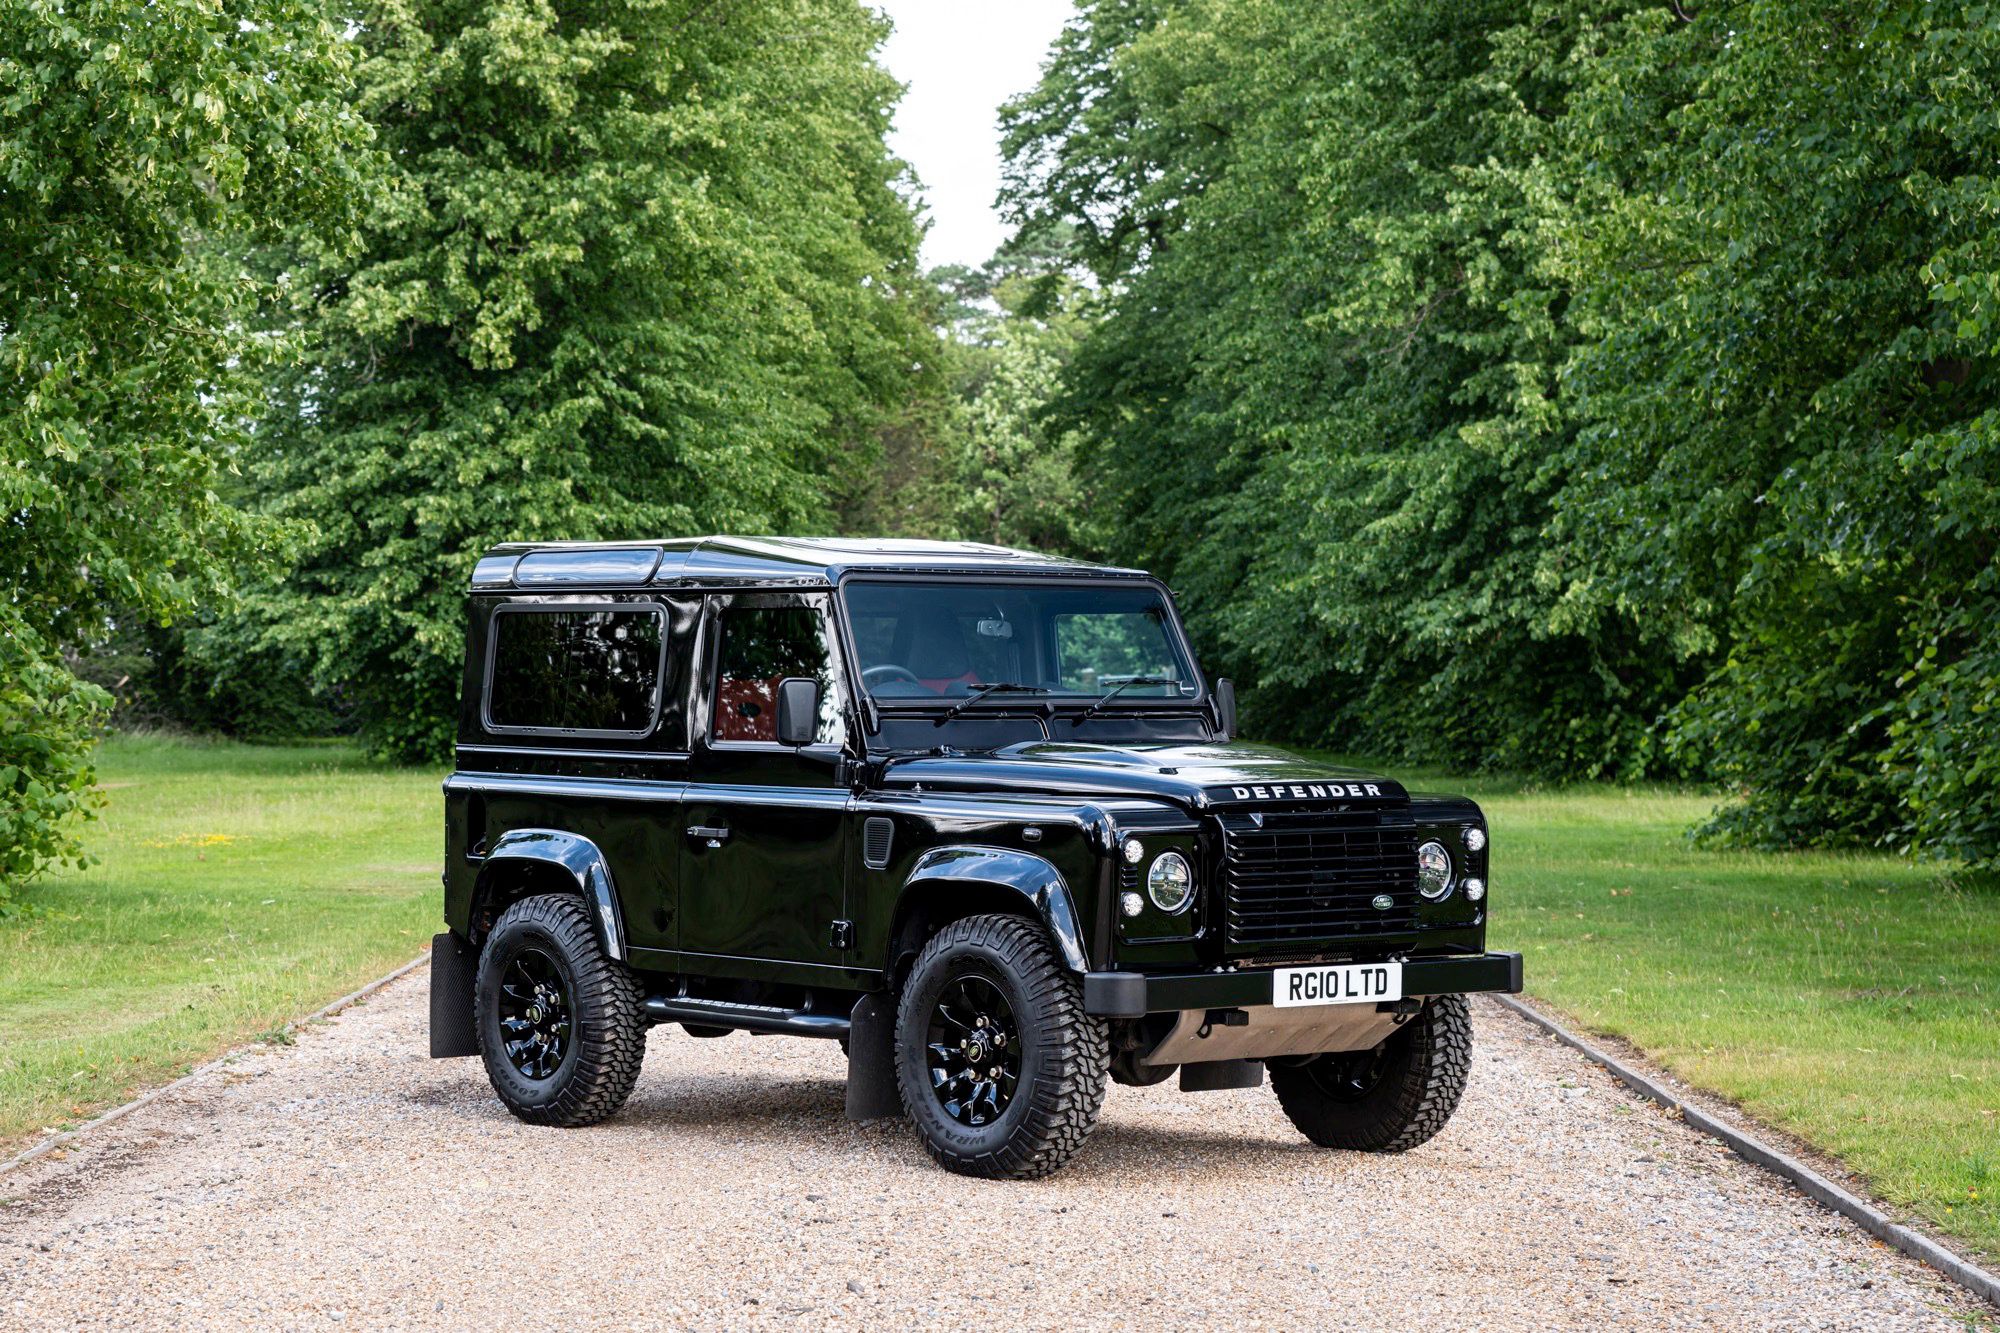 2016 (65) Land Rover Defender 90 XS - SOLD